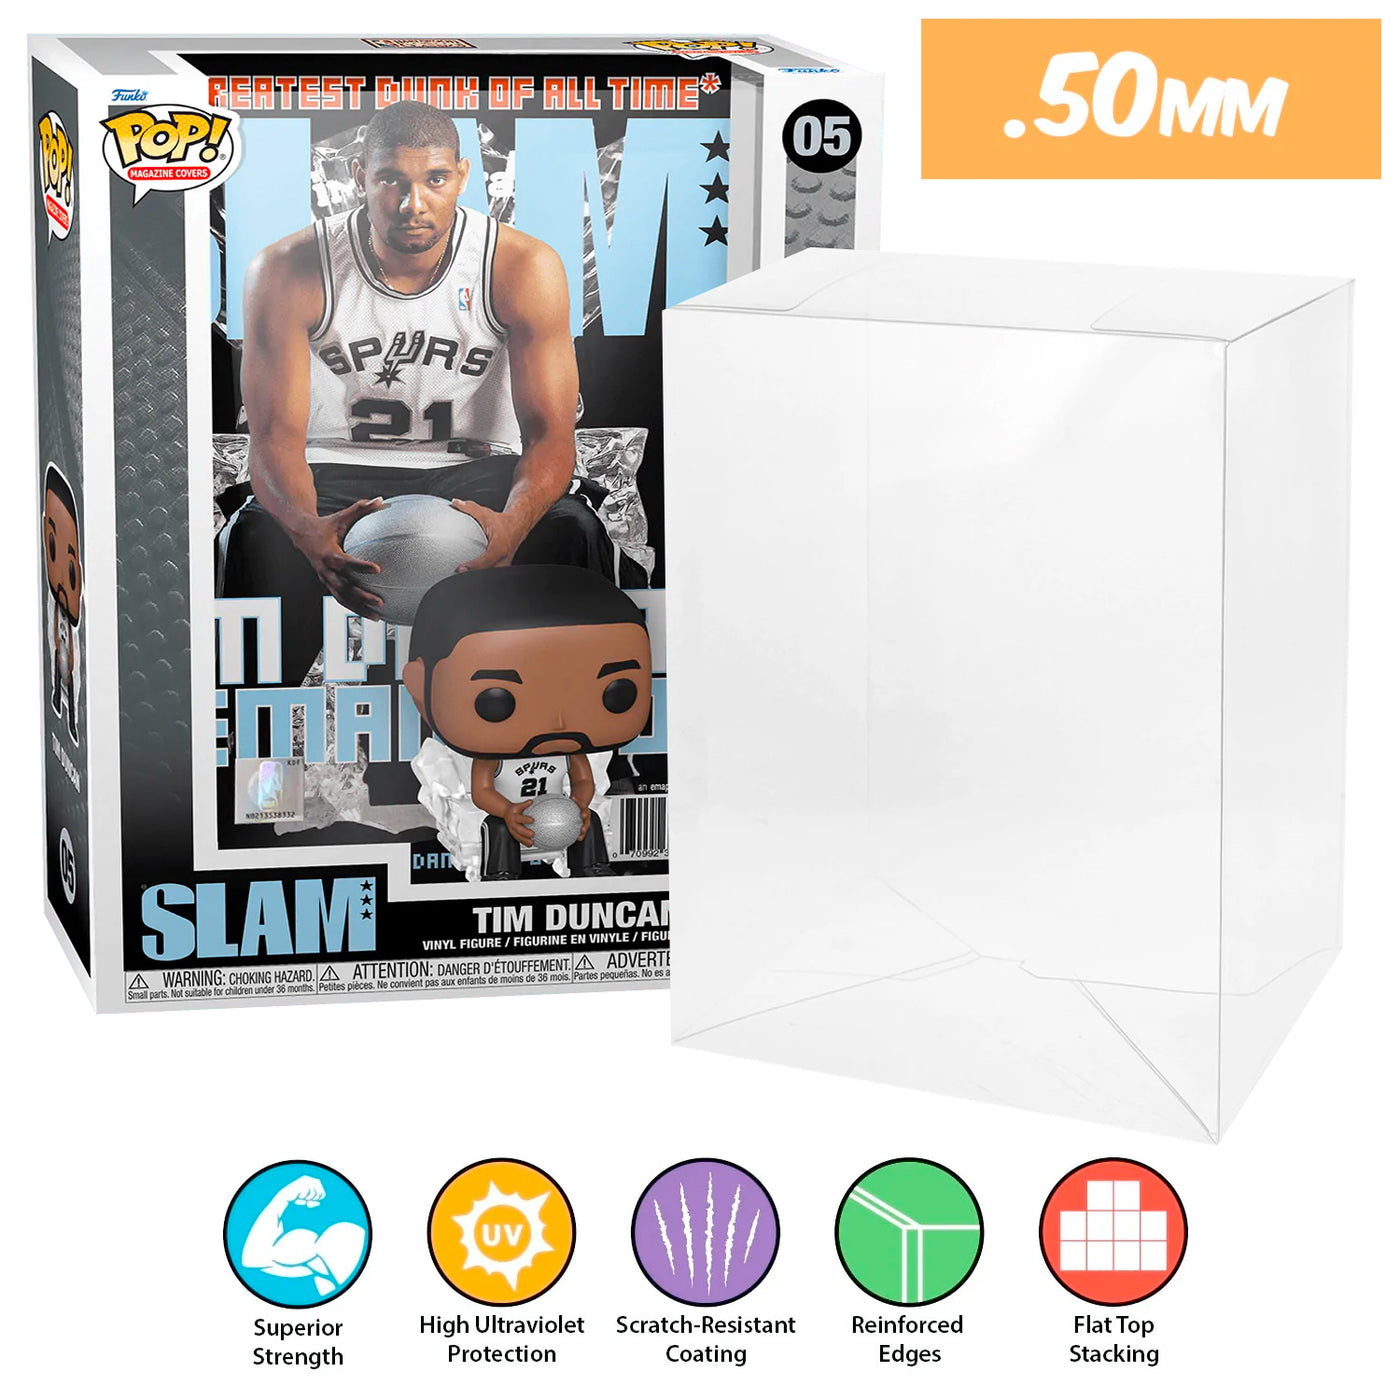 05 tim duncan pop magazines covers slam nba best funko pop protectors thick strong uv scratch flat top stack vinyl display geek plastic shield vaulted eco armor fits collect protect display case kollector protector